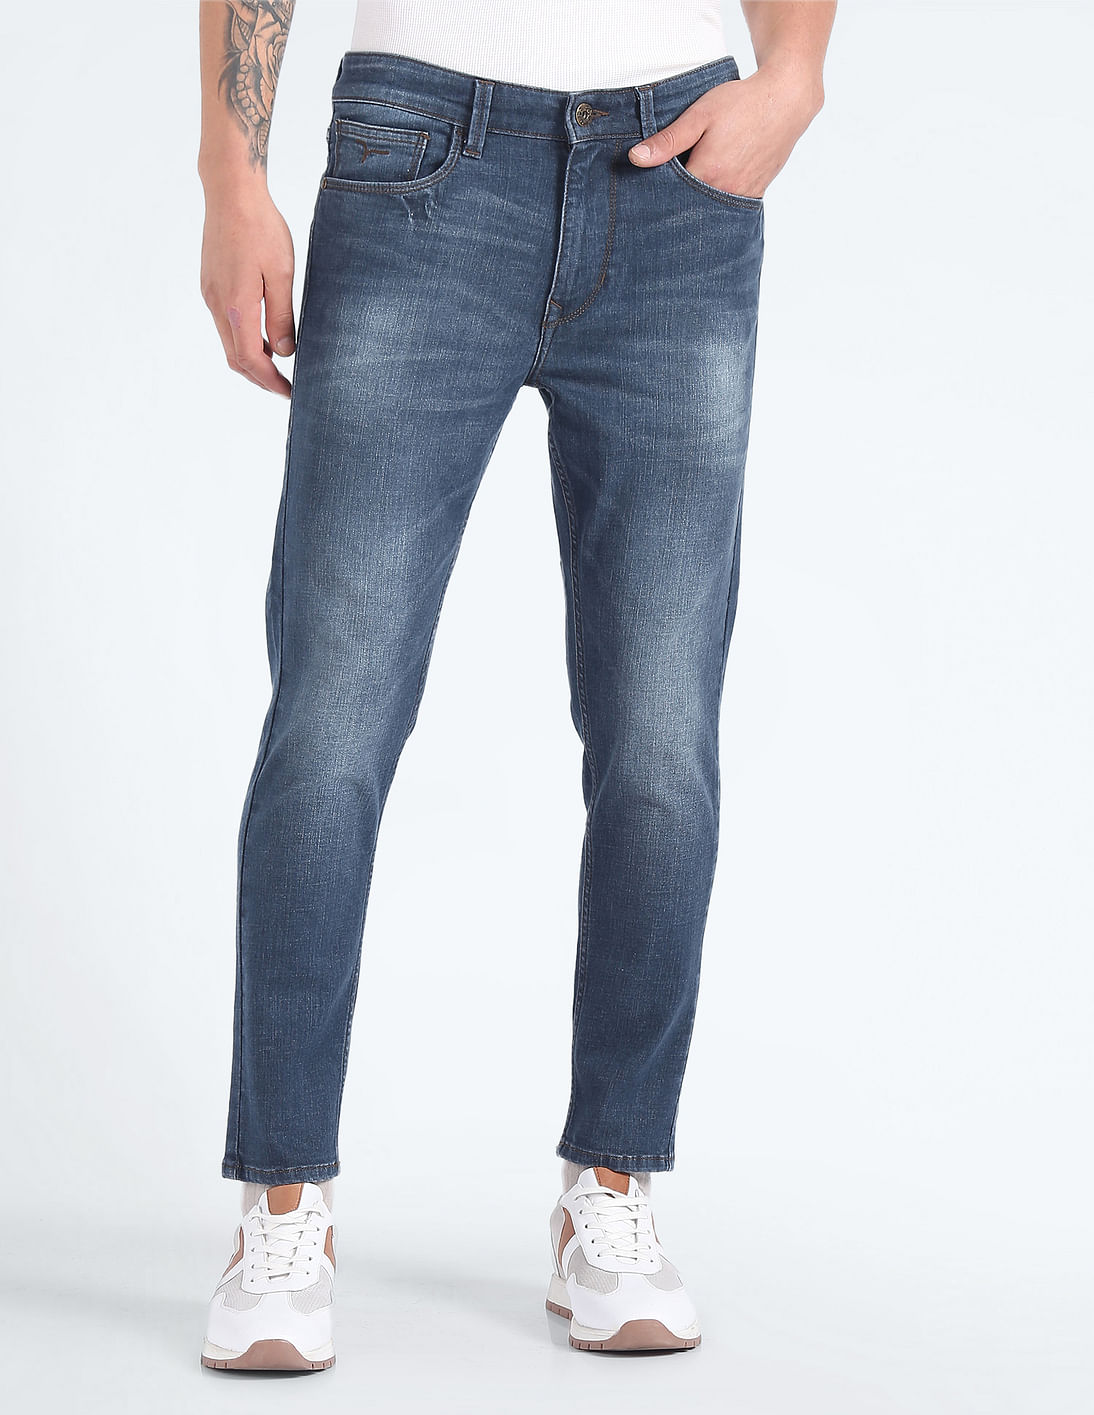 Buy Flying Machine Mankle Slim Fit Whiskered Jeans - NNNOW.com